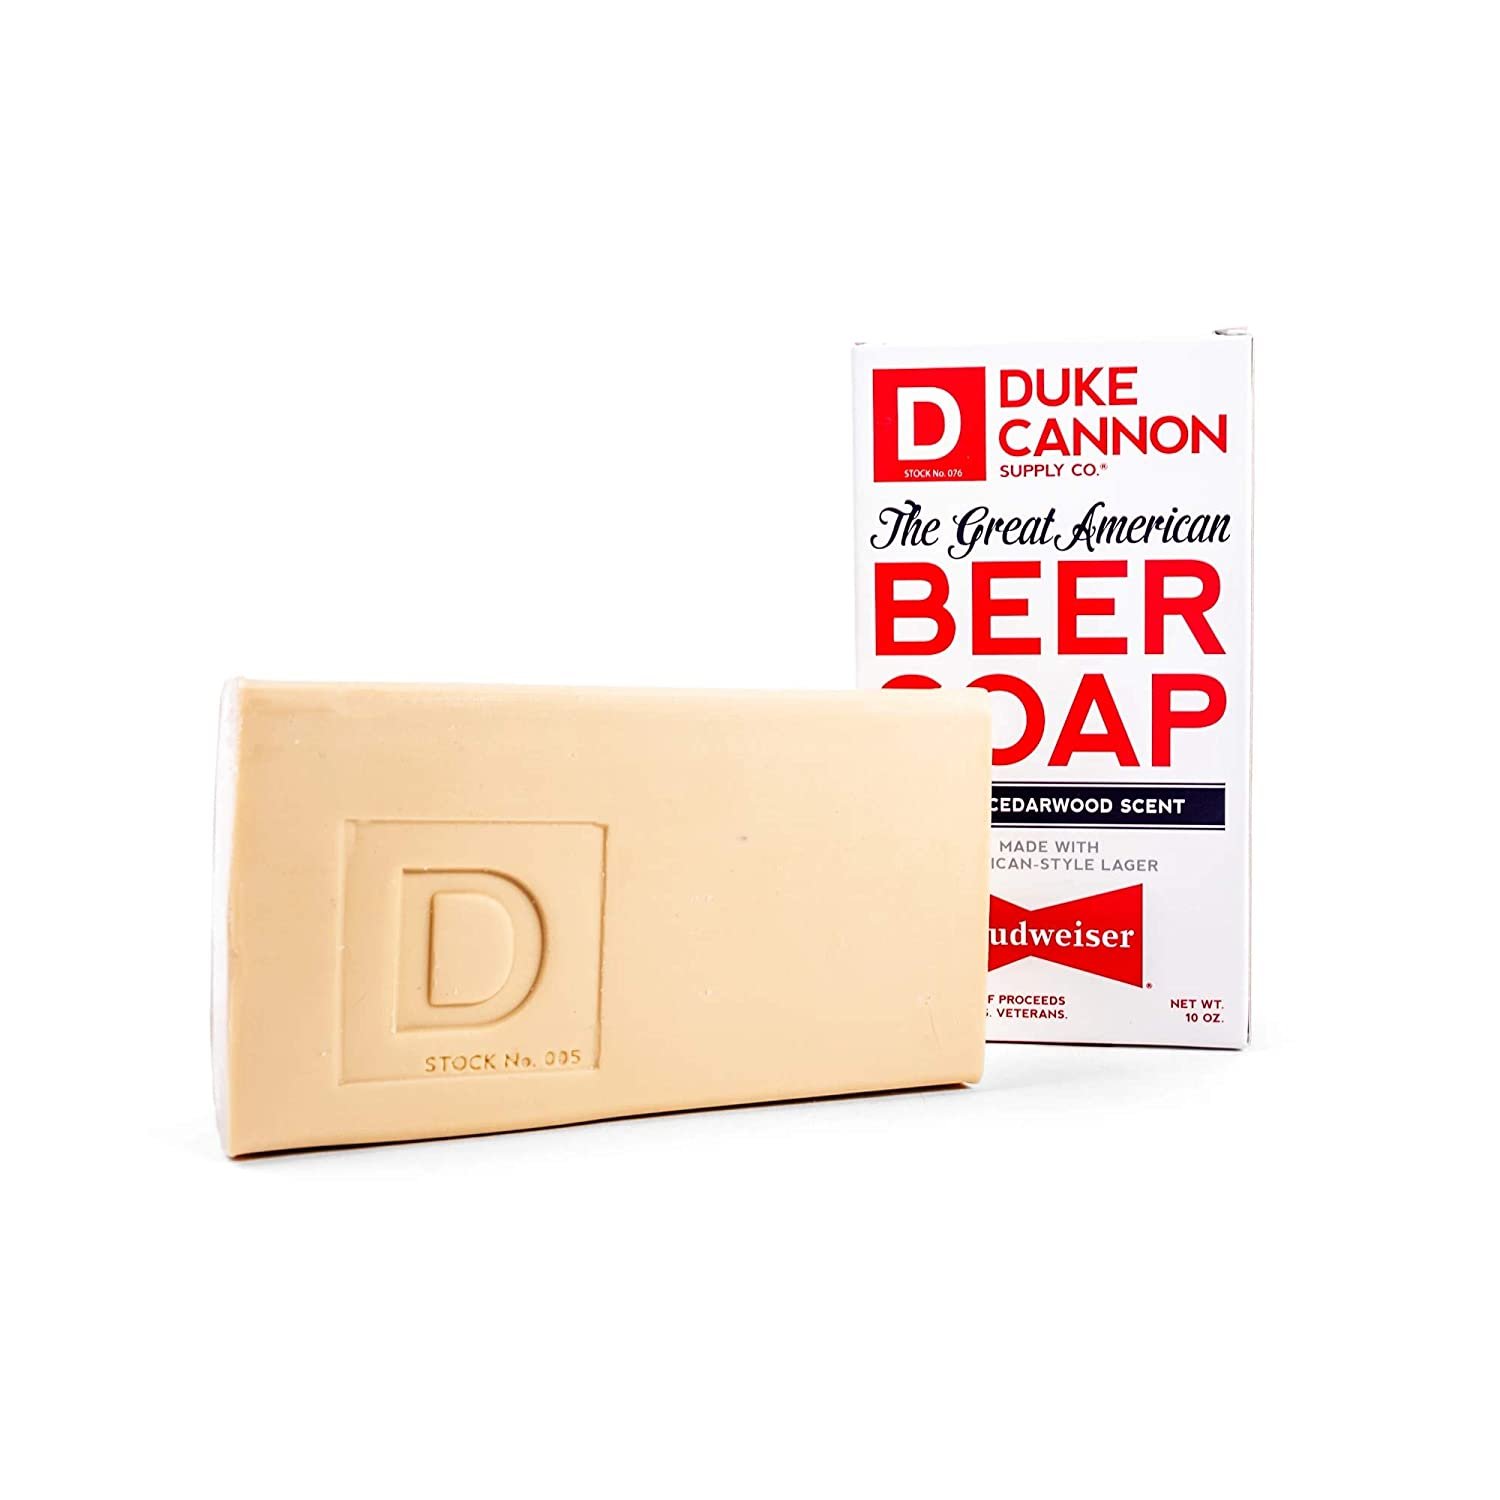 Duke Cannon Supply Co. Great American Beer Soap Bar for Men, 10 ounce / Made with Budweiser - image 2 of 2